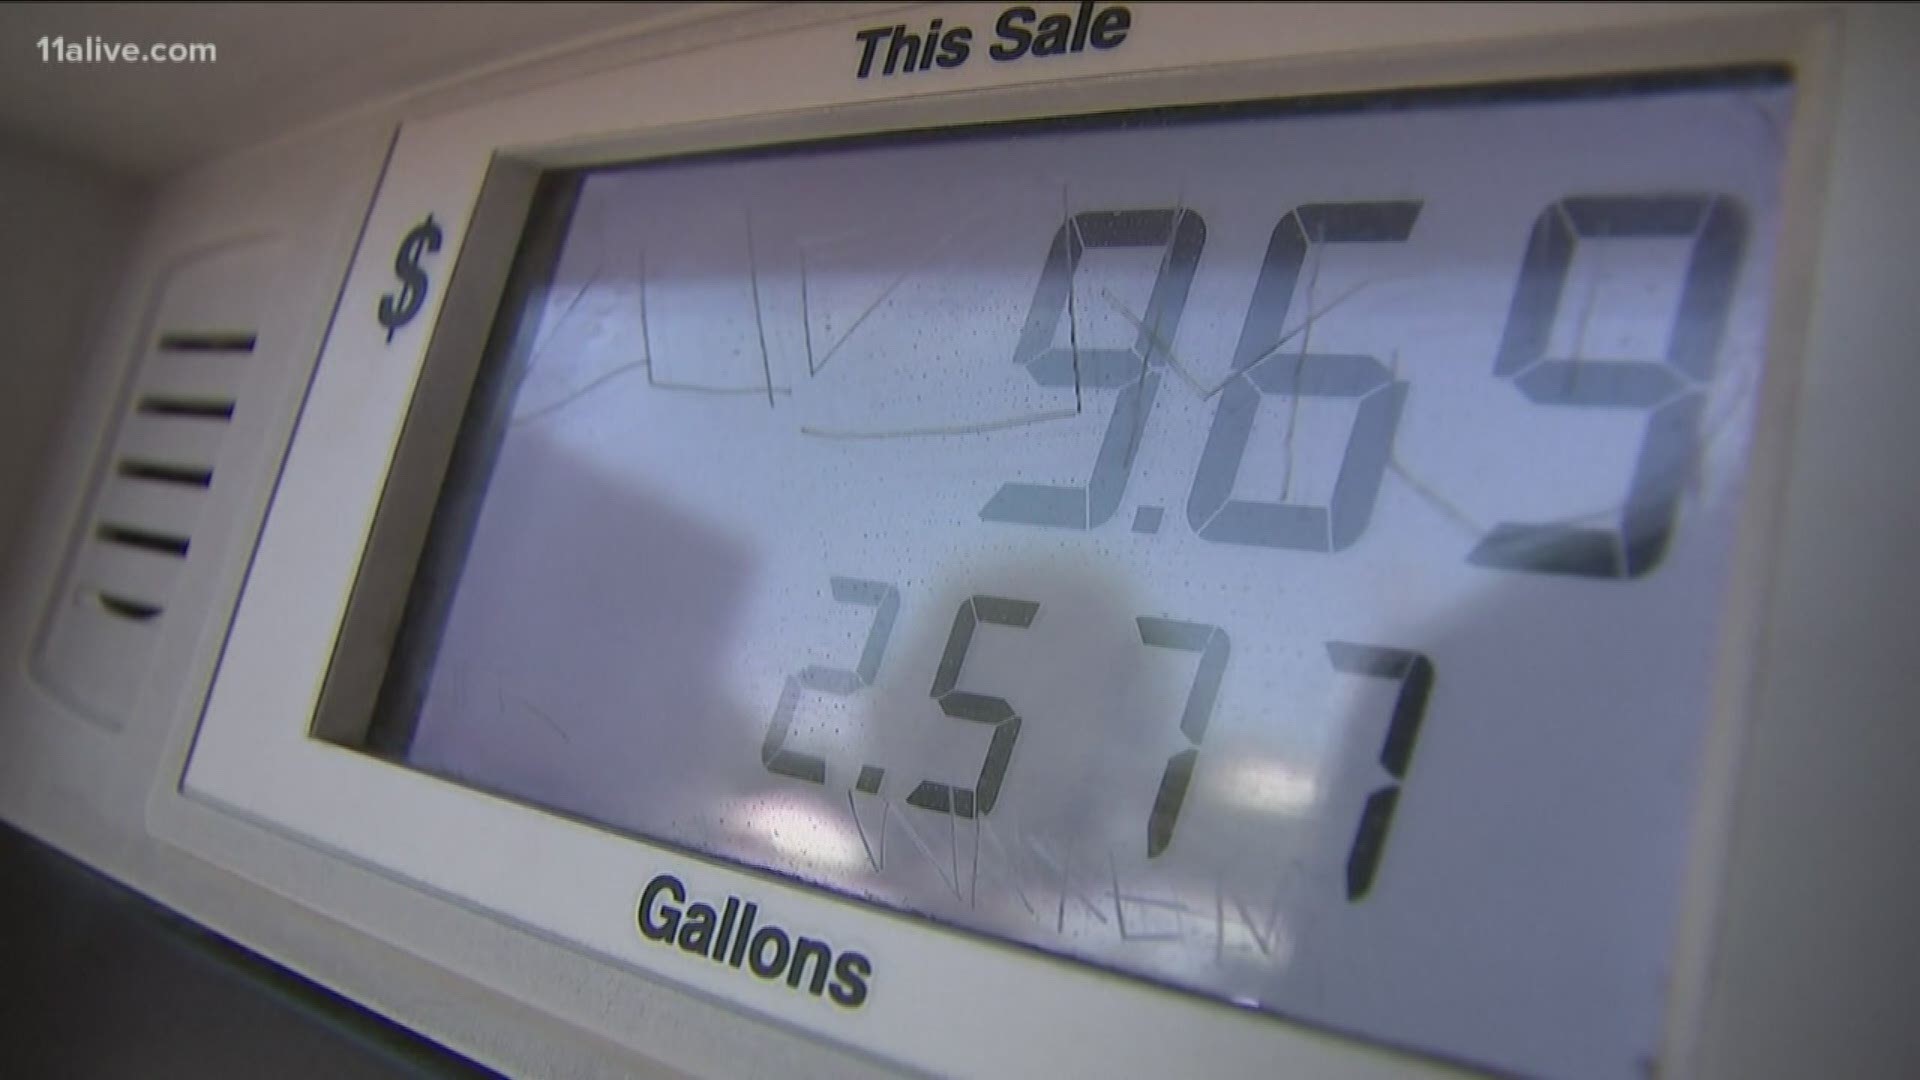 According to AAA, the average price for gas in Georgia is now $1.95 a gallon for regular unleaded gas.